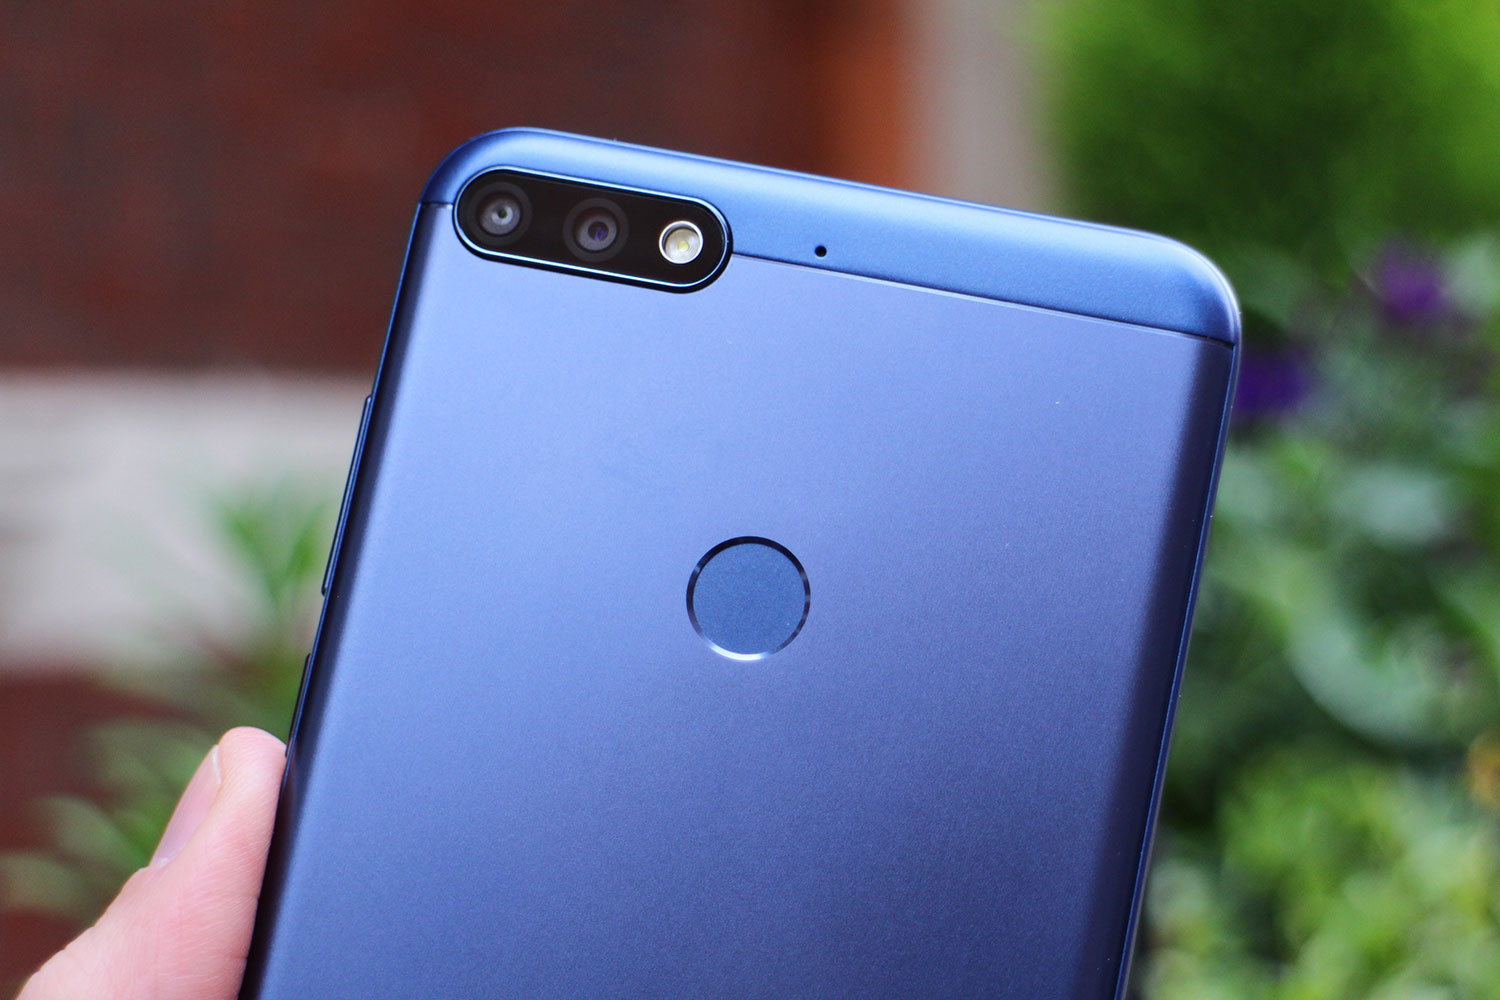 Honor 7C and Honor 7A review